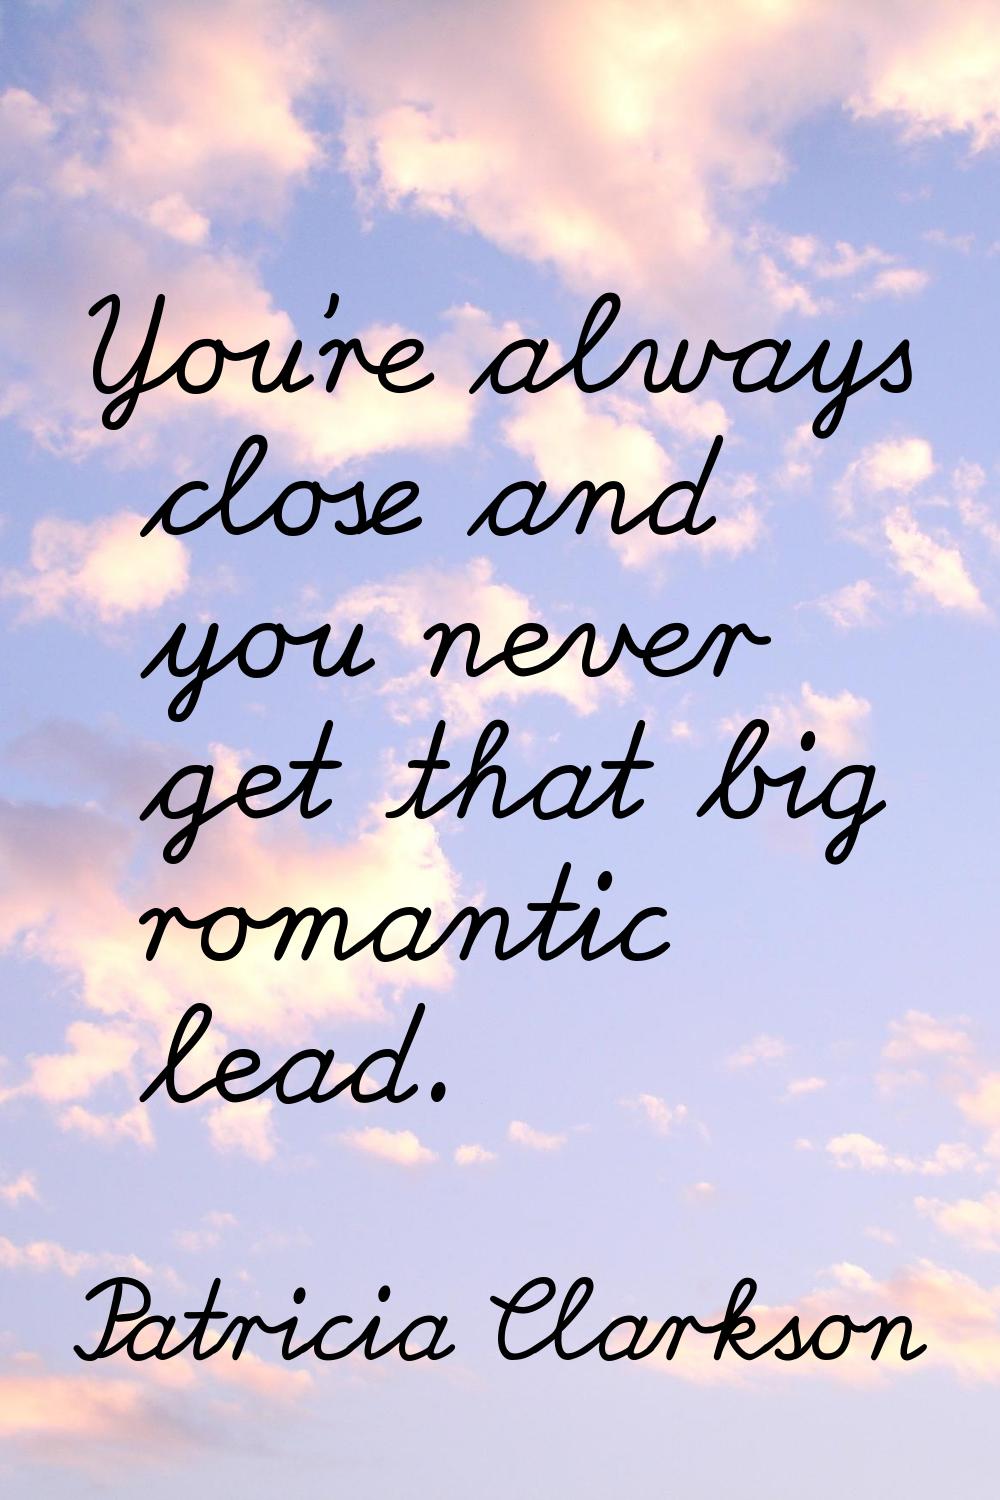 You're always close and you never get that big romantic lead.